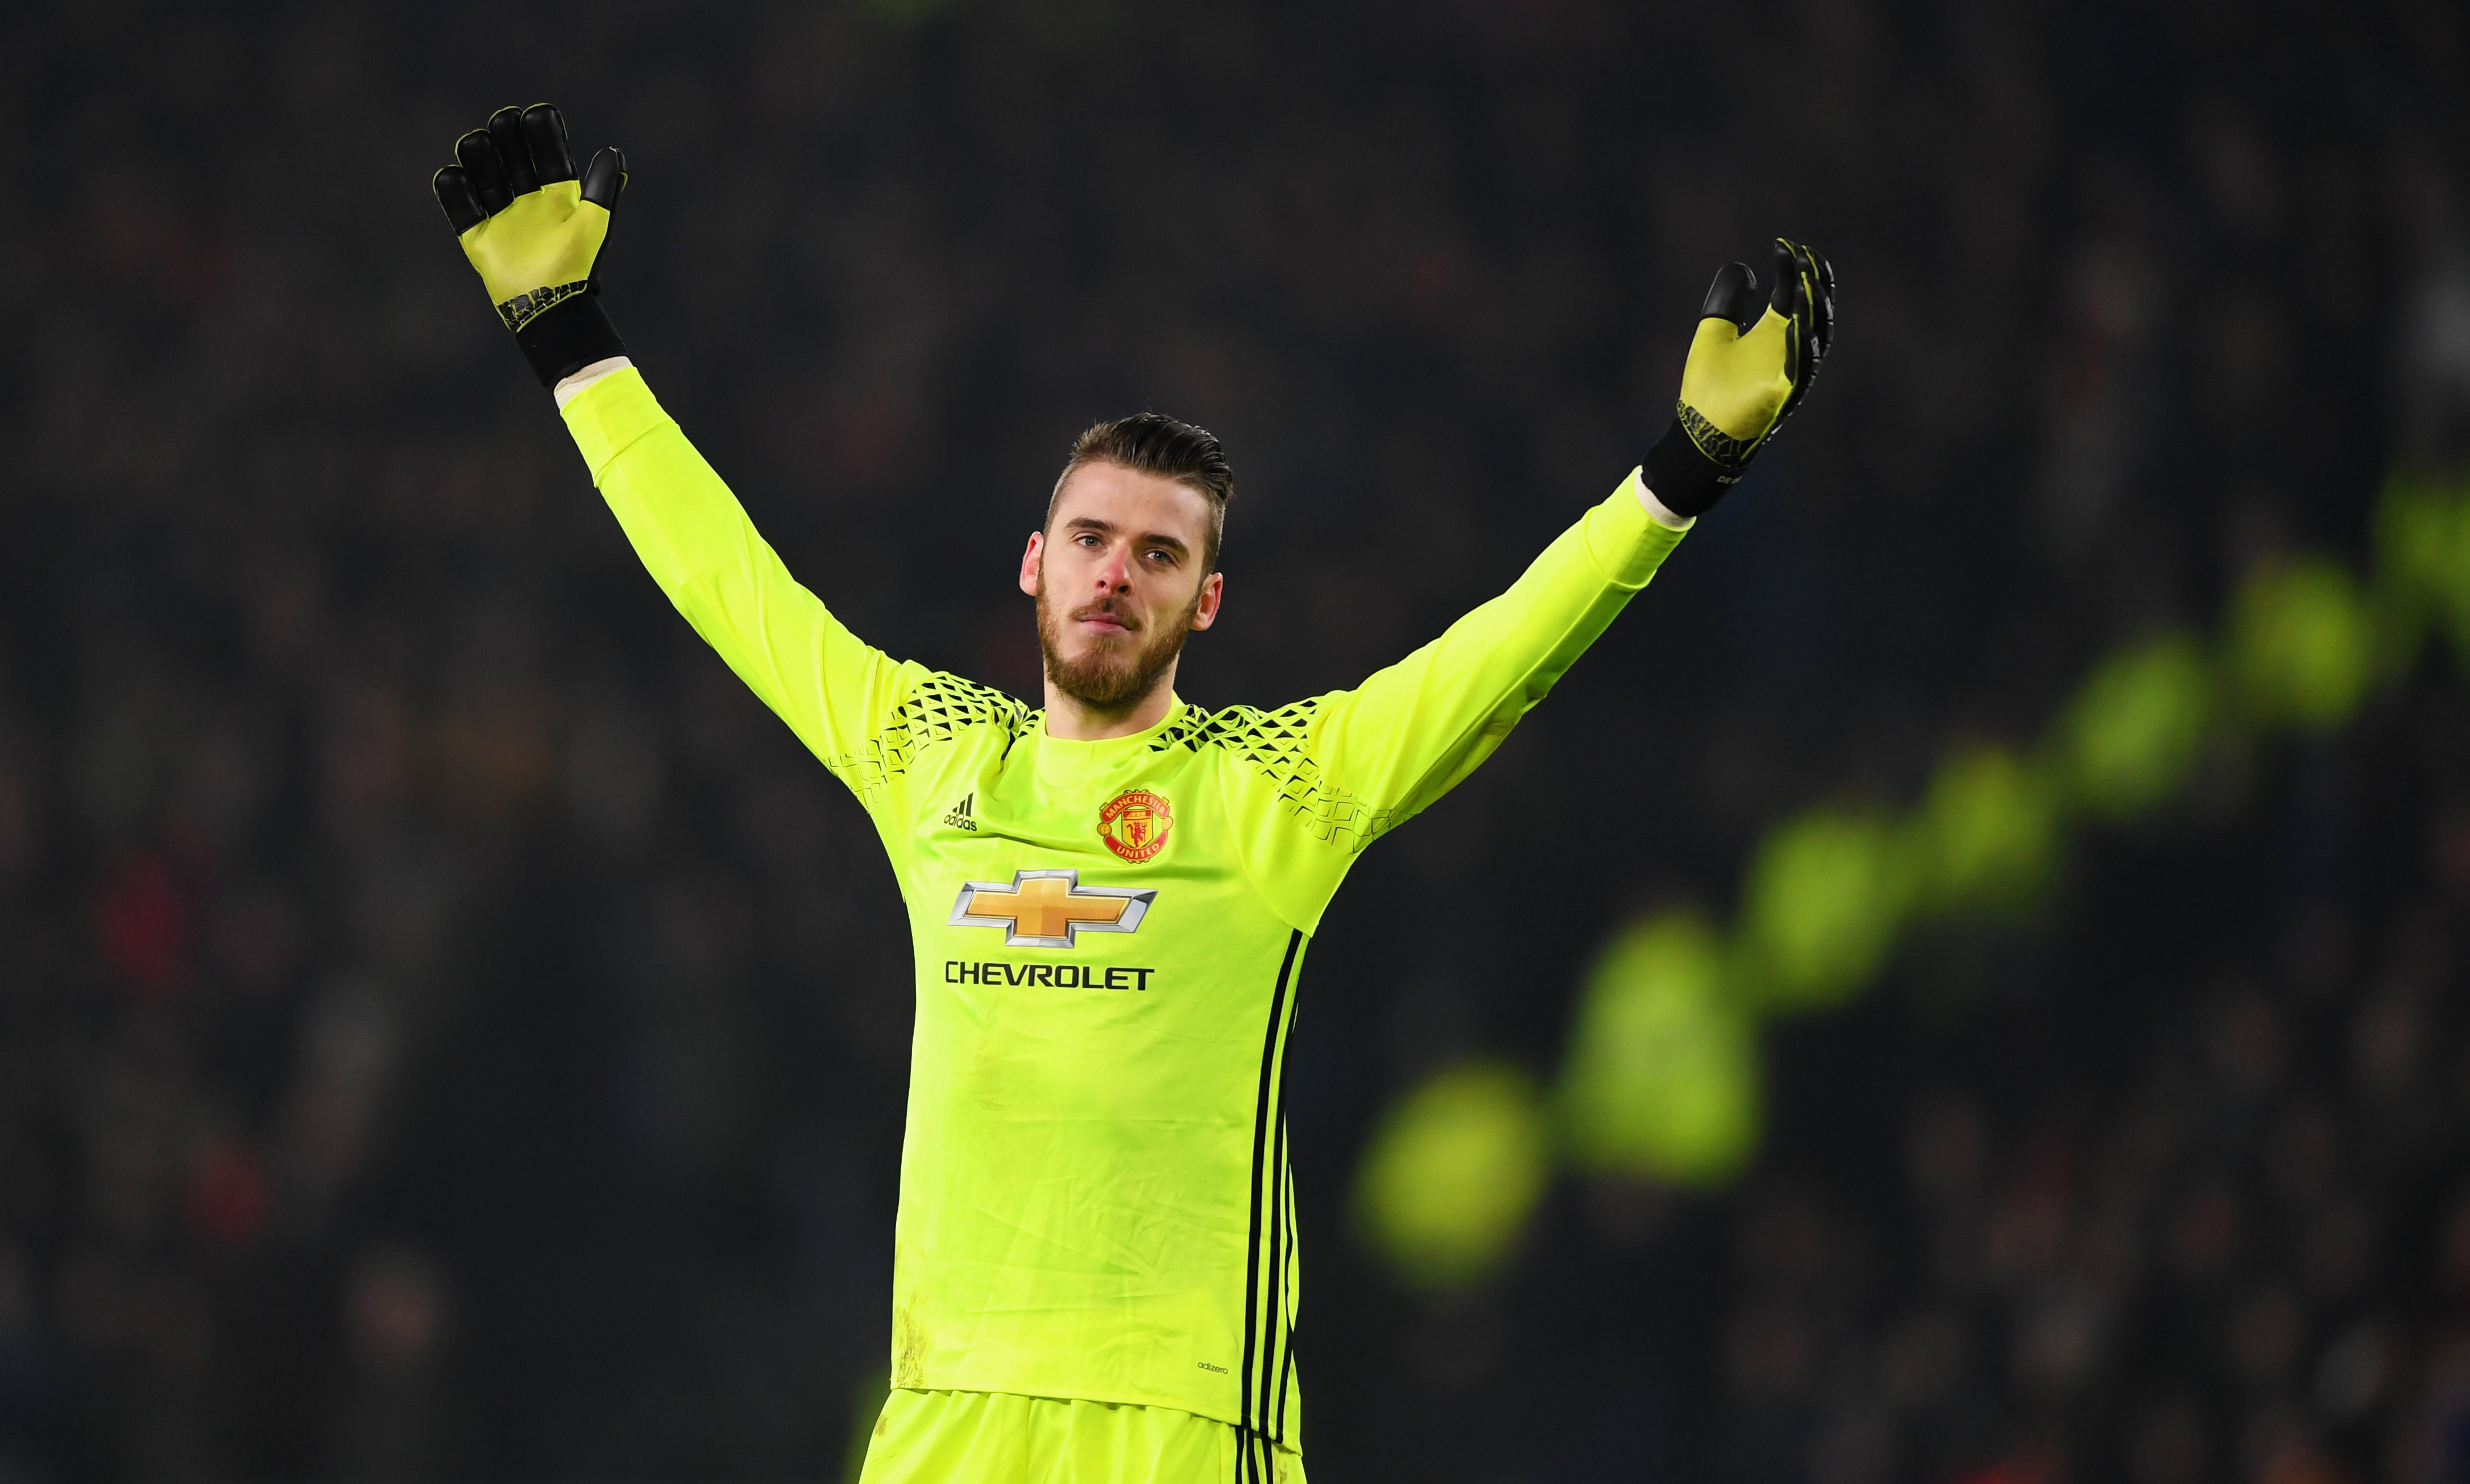 HULL, ENGLAND - JANUARY 26:  David De Gea of Manchester United reacts during the EFL Cup Semi-Final second leg match between Hull City and Manchester United at KCOM Stadium on January 26, 2017 in Hull, England.  (Photo by Gareth Copley/Getty Images)